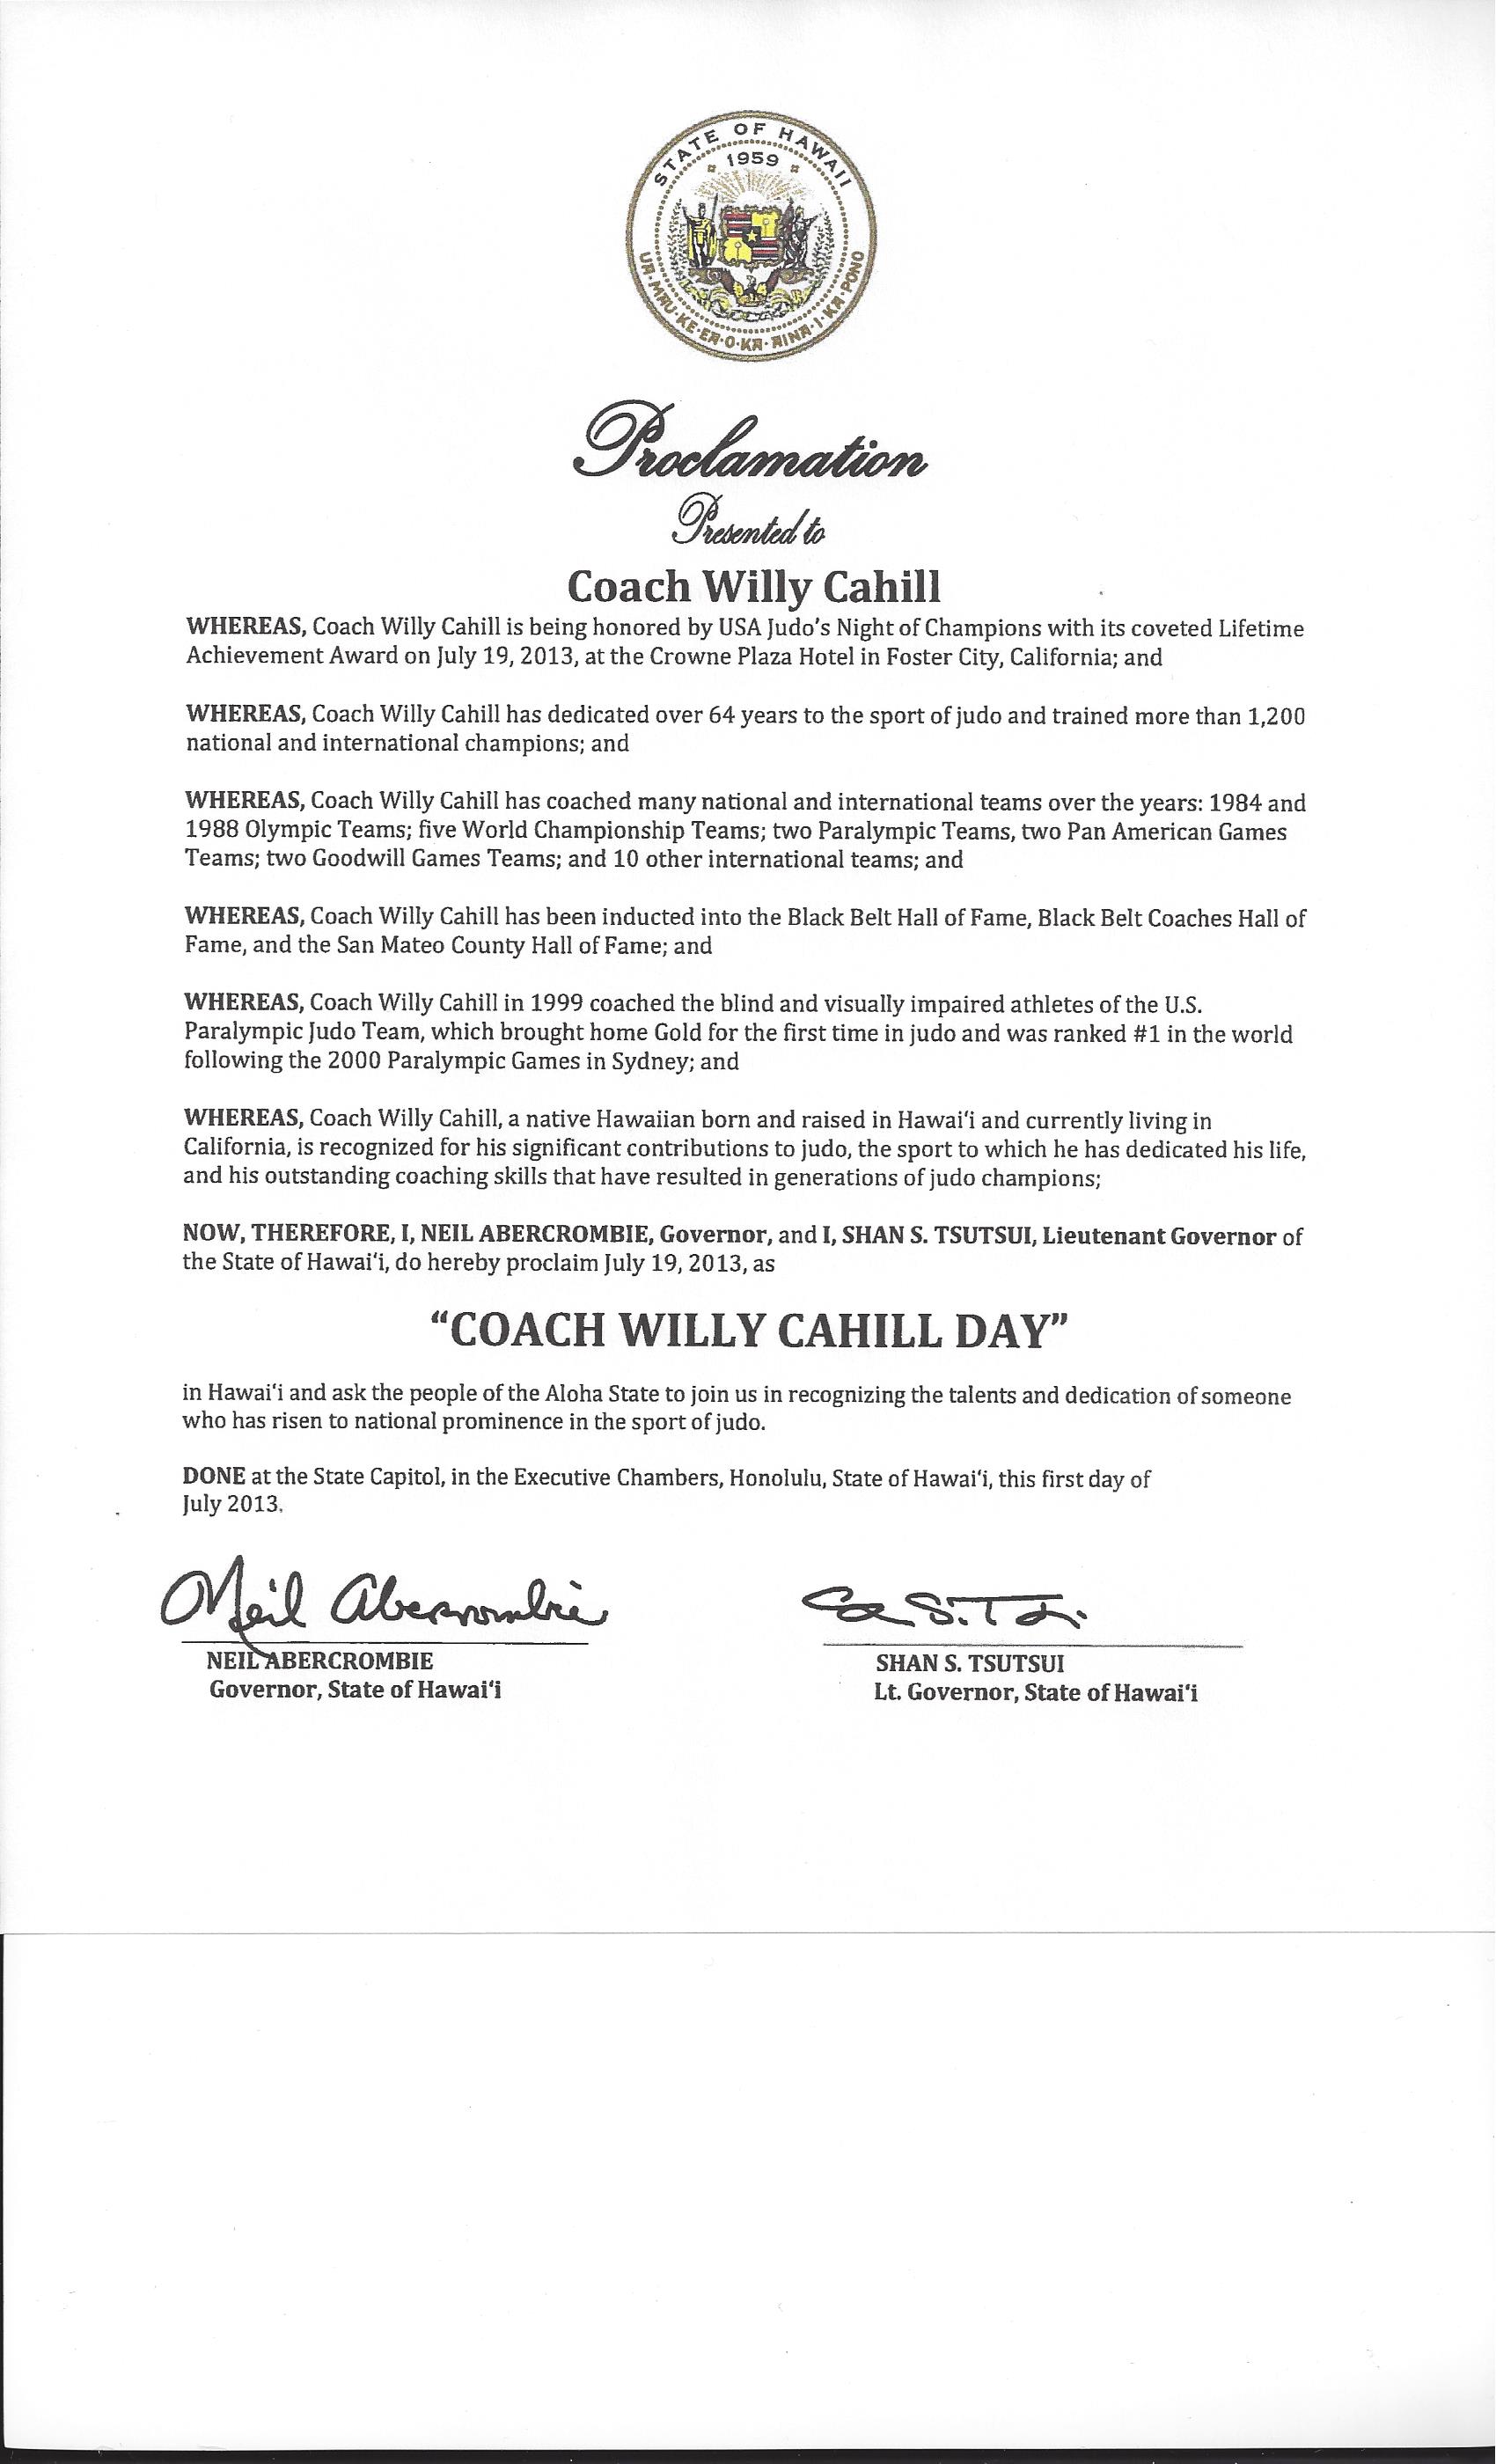 Governor and Lt. Governor of Hawaii Proclamation Declaring July 19, 2013 as "Coach Willy Cahill Day"